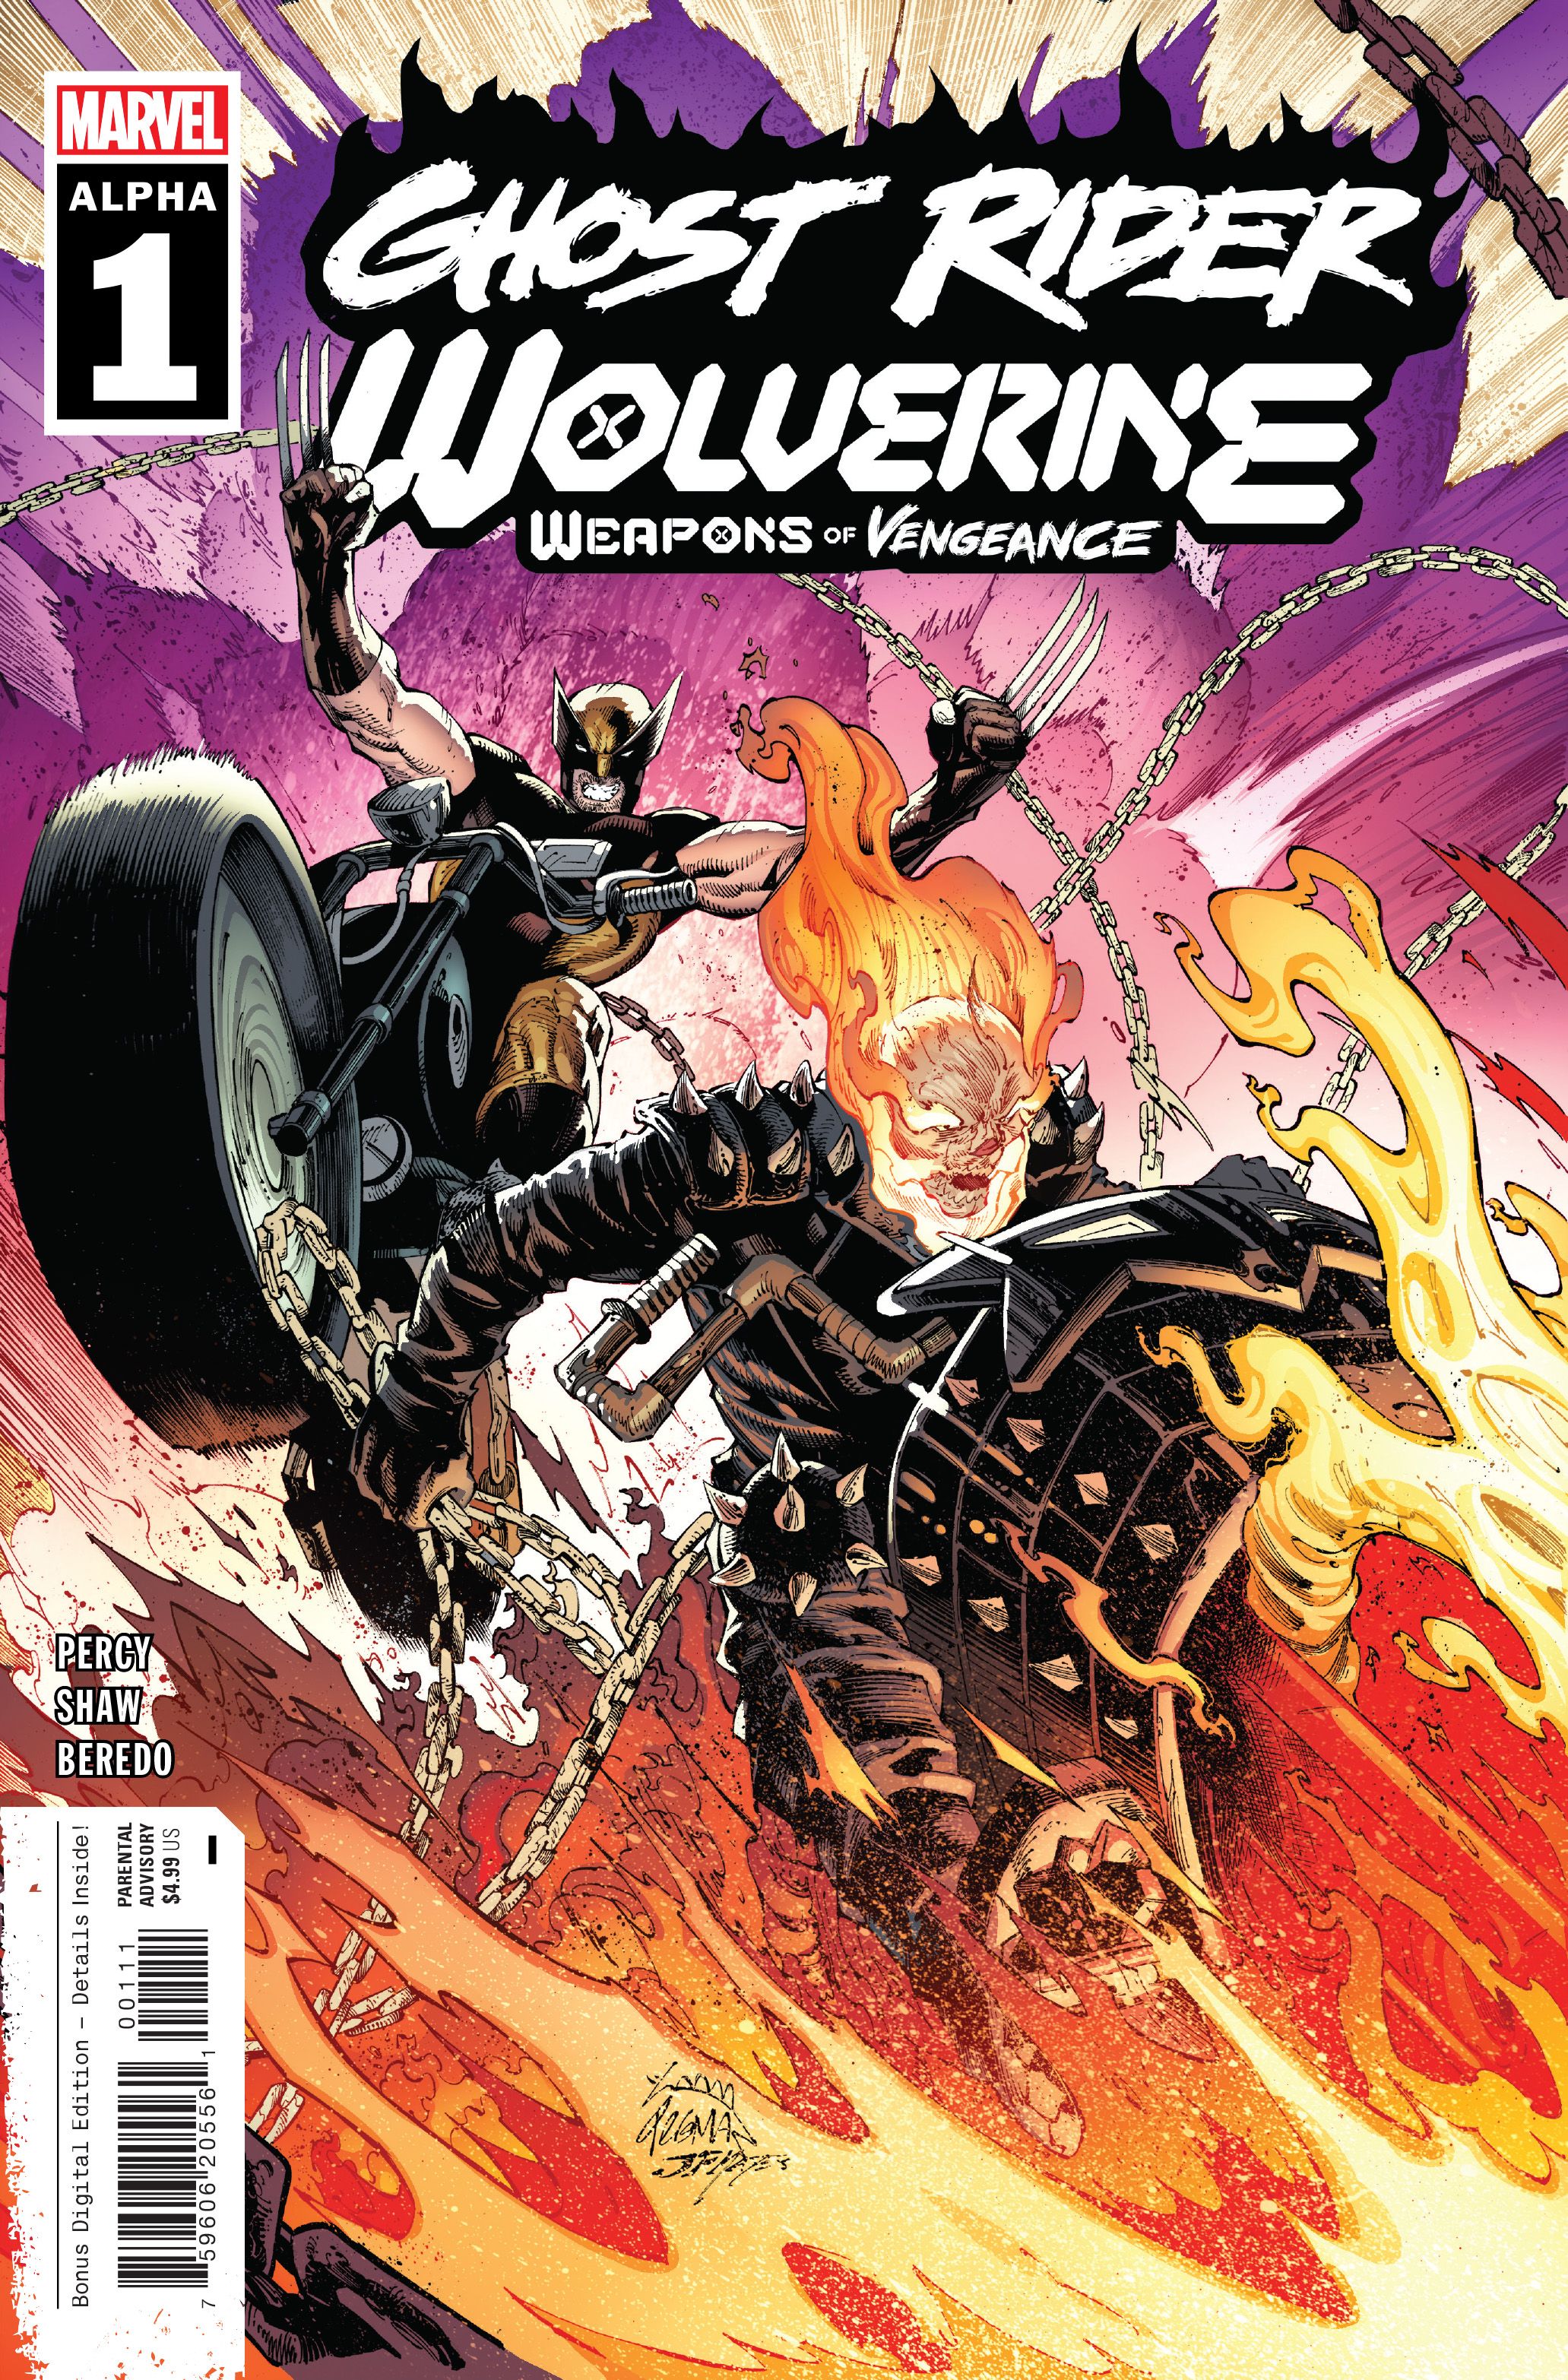 Ghost Rider Wolverine Weapons of Vengeance Alpha #1 Cover